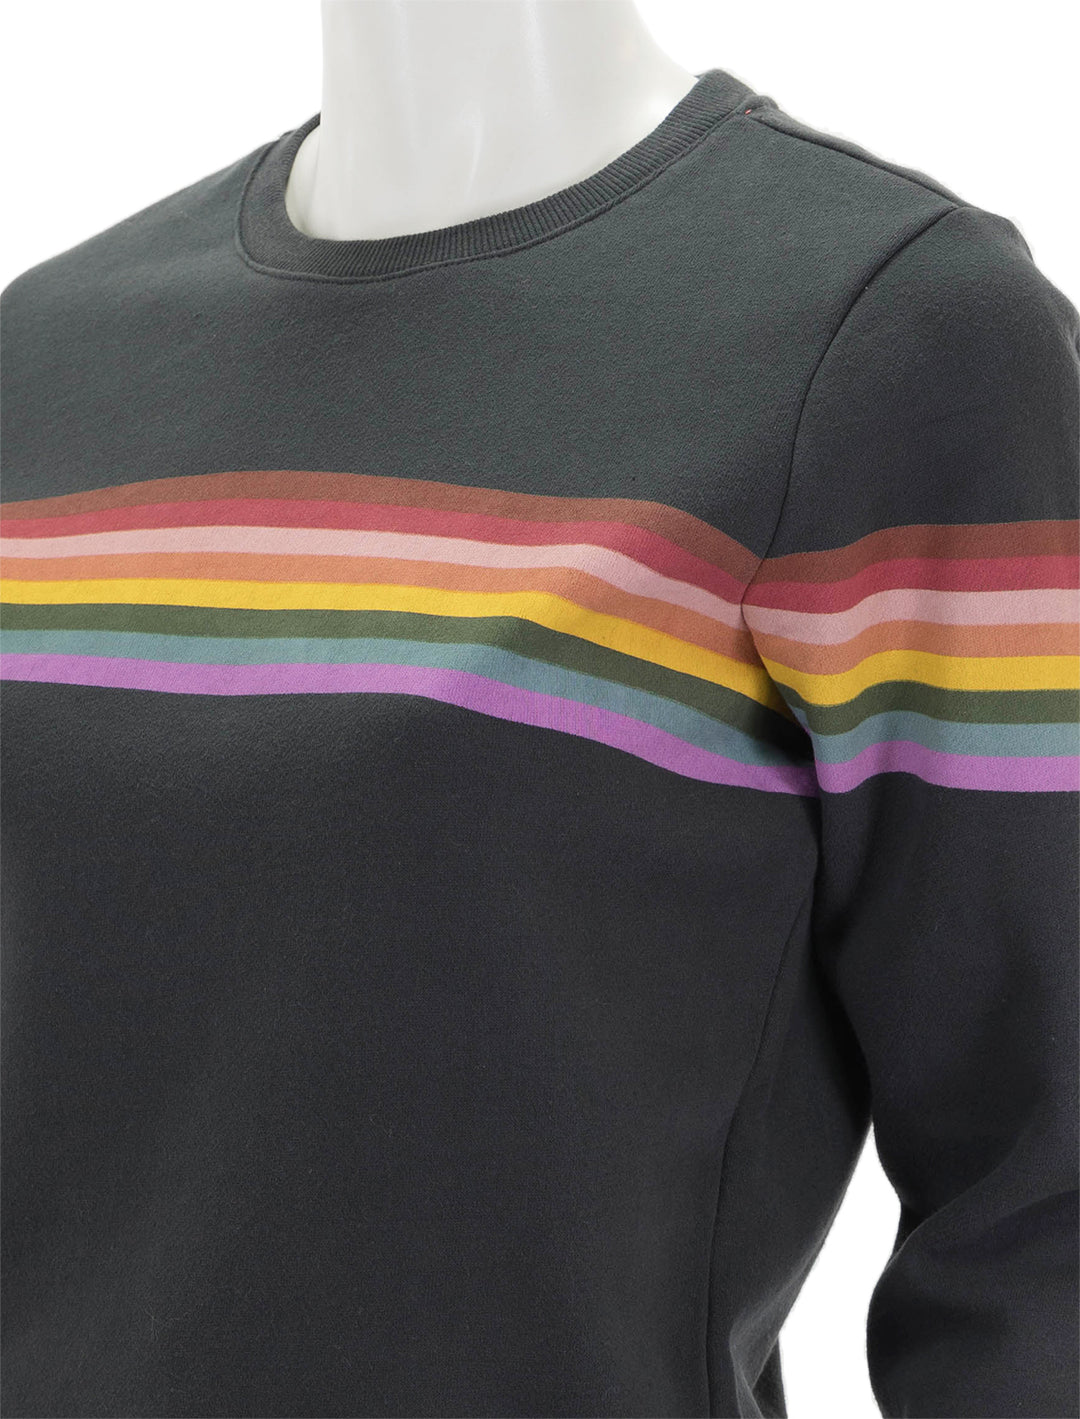 Close-up view of Marine Layer's anytime sweatshirt in washed black.